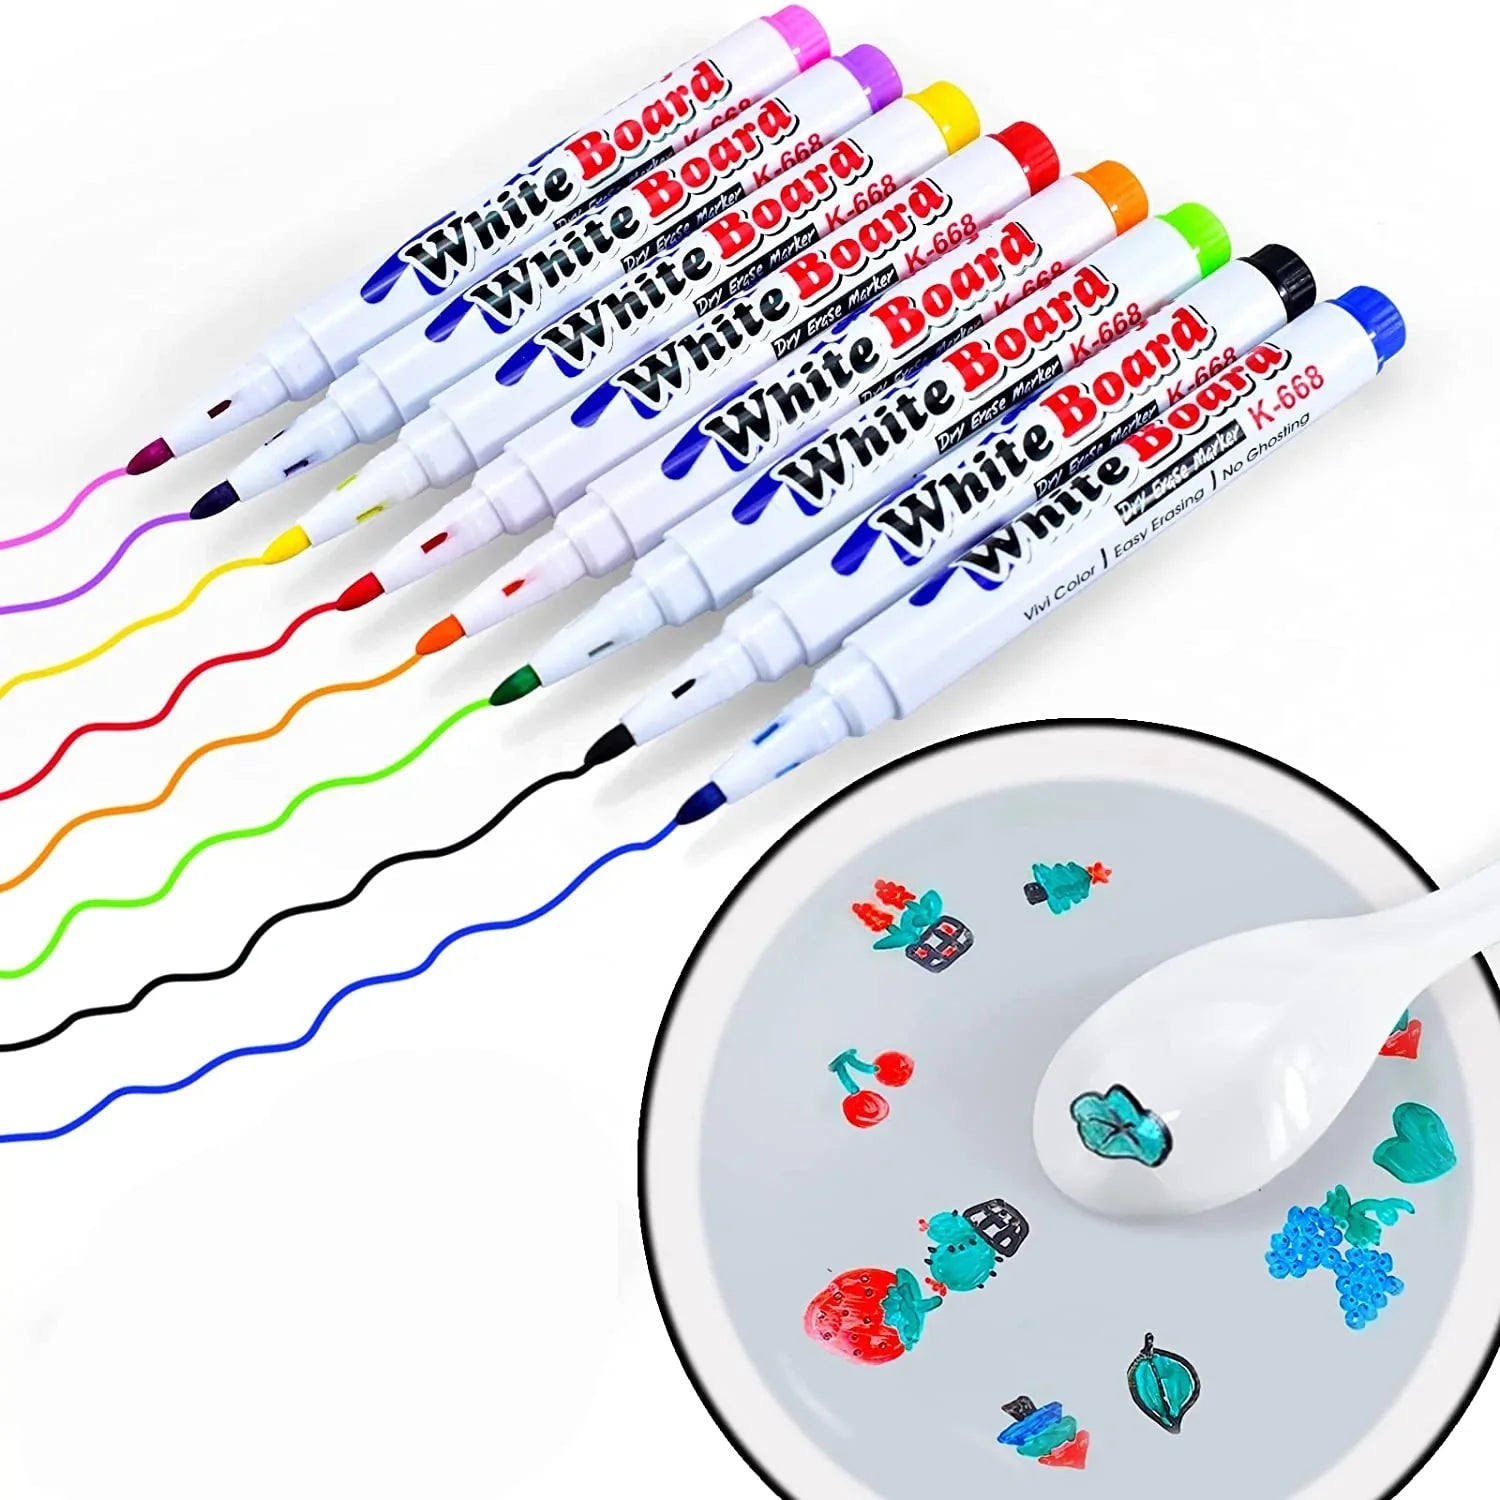 12 Colors Magical Water Painting Pen - Givemethisnow